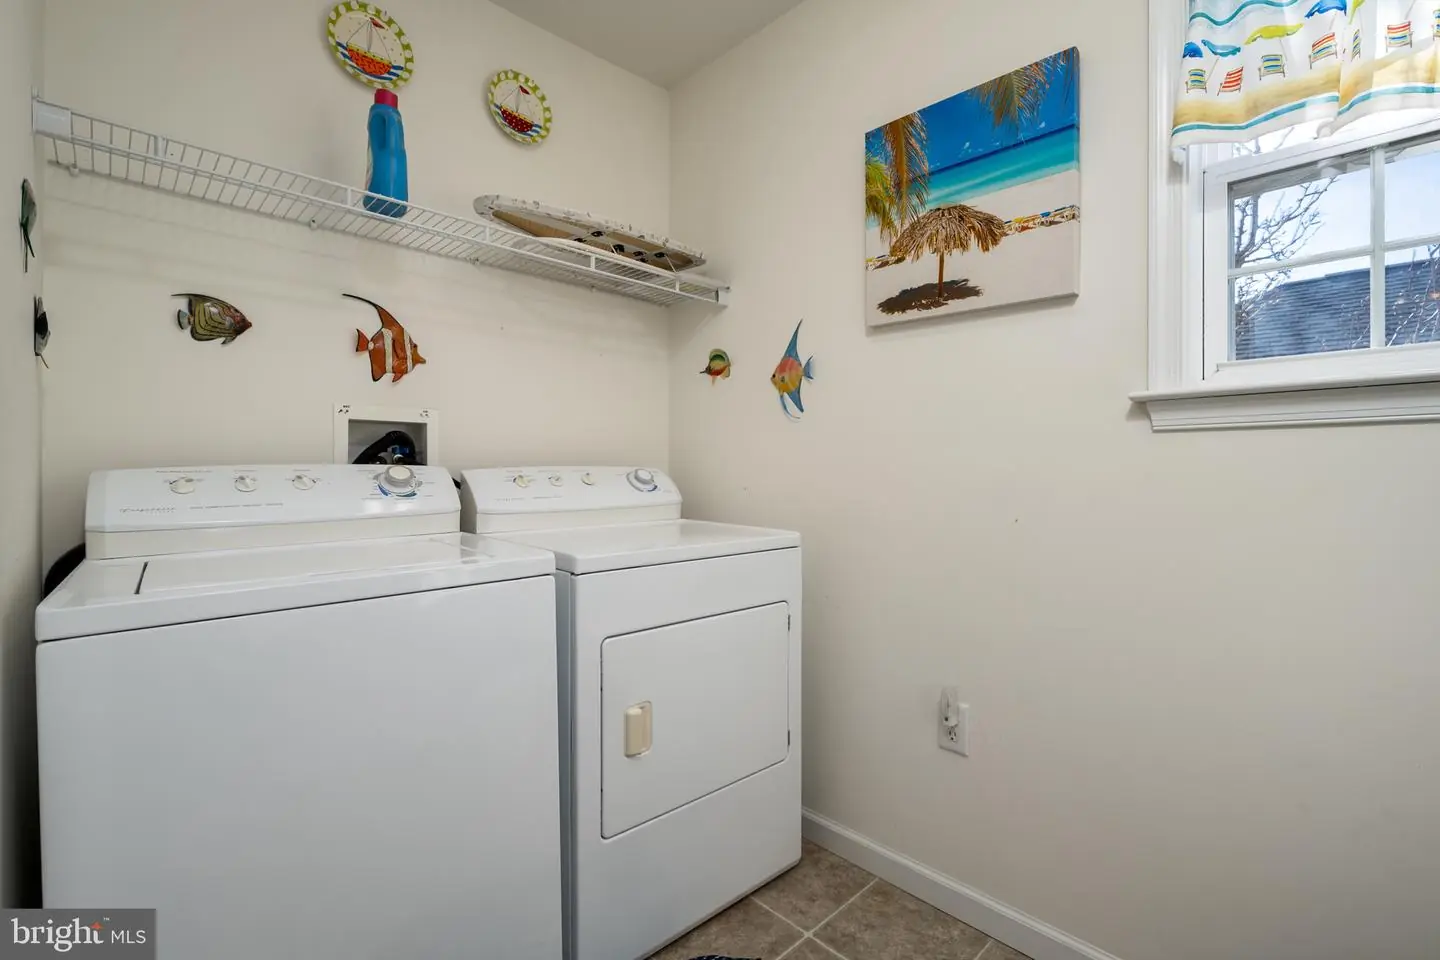 MDWO2018142-802789298558-2023-12-31-08-19-43 803 N Baltimore Ave #a | Ocean City, MD Real Estate For Sale | MLS# Mdwo2018142  - 1st Choice Properties